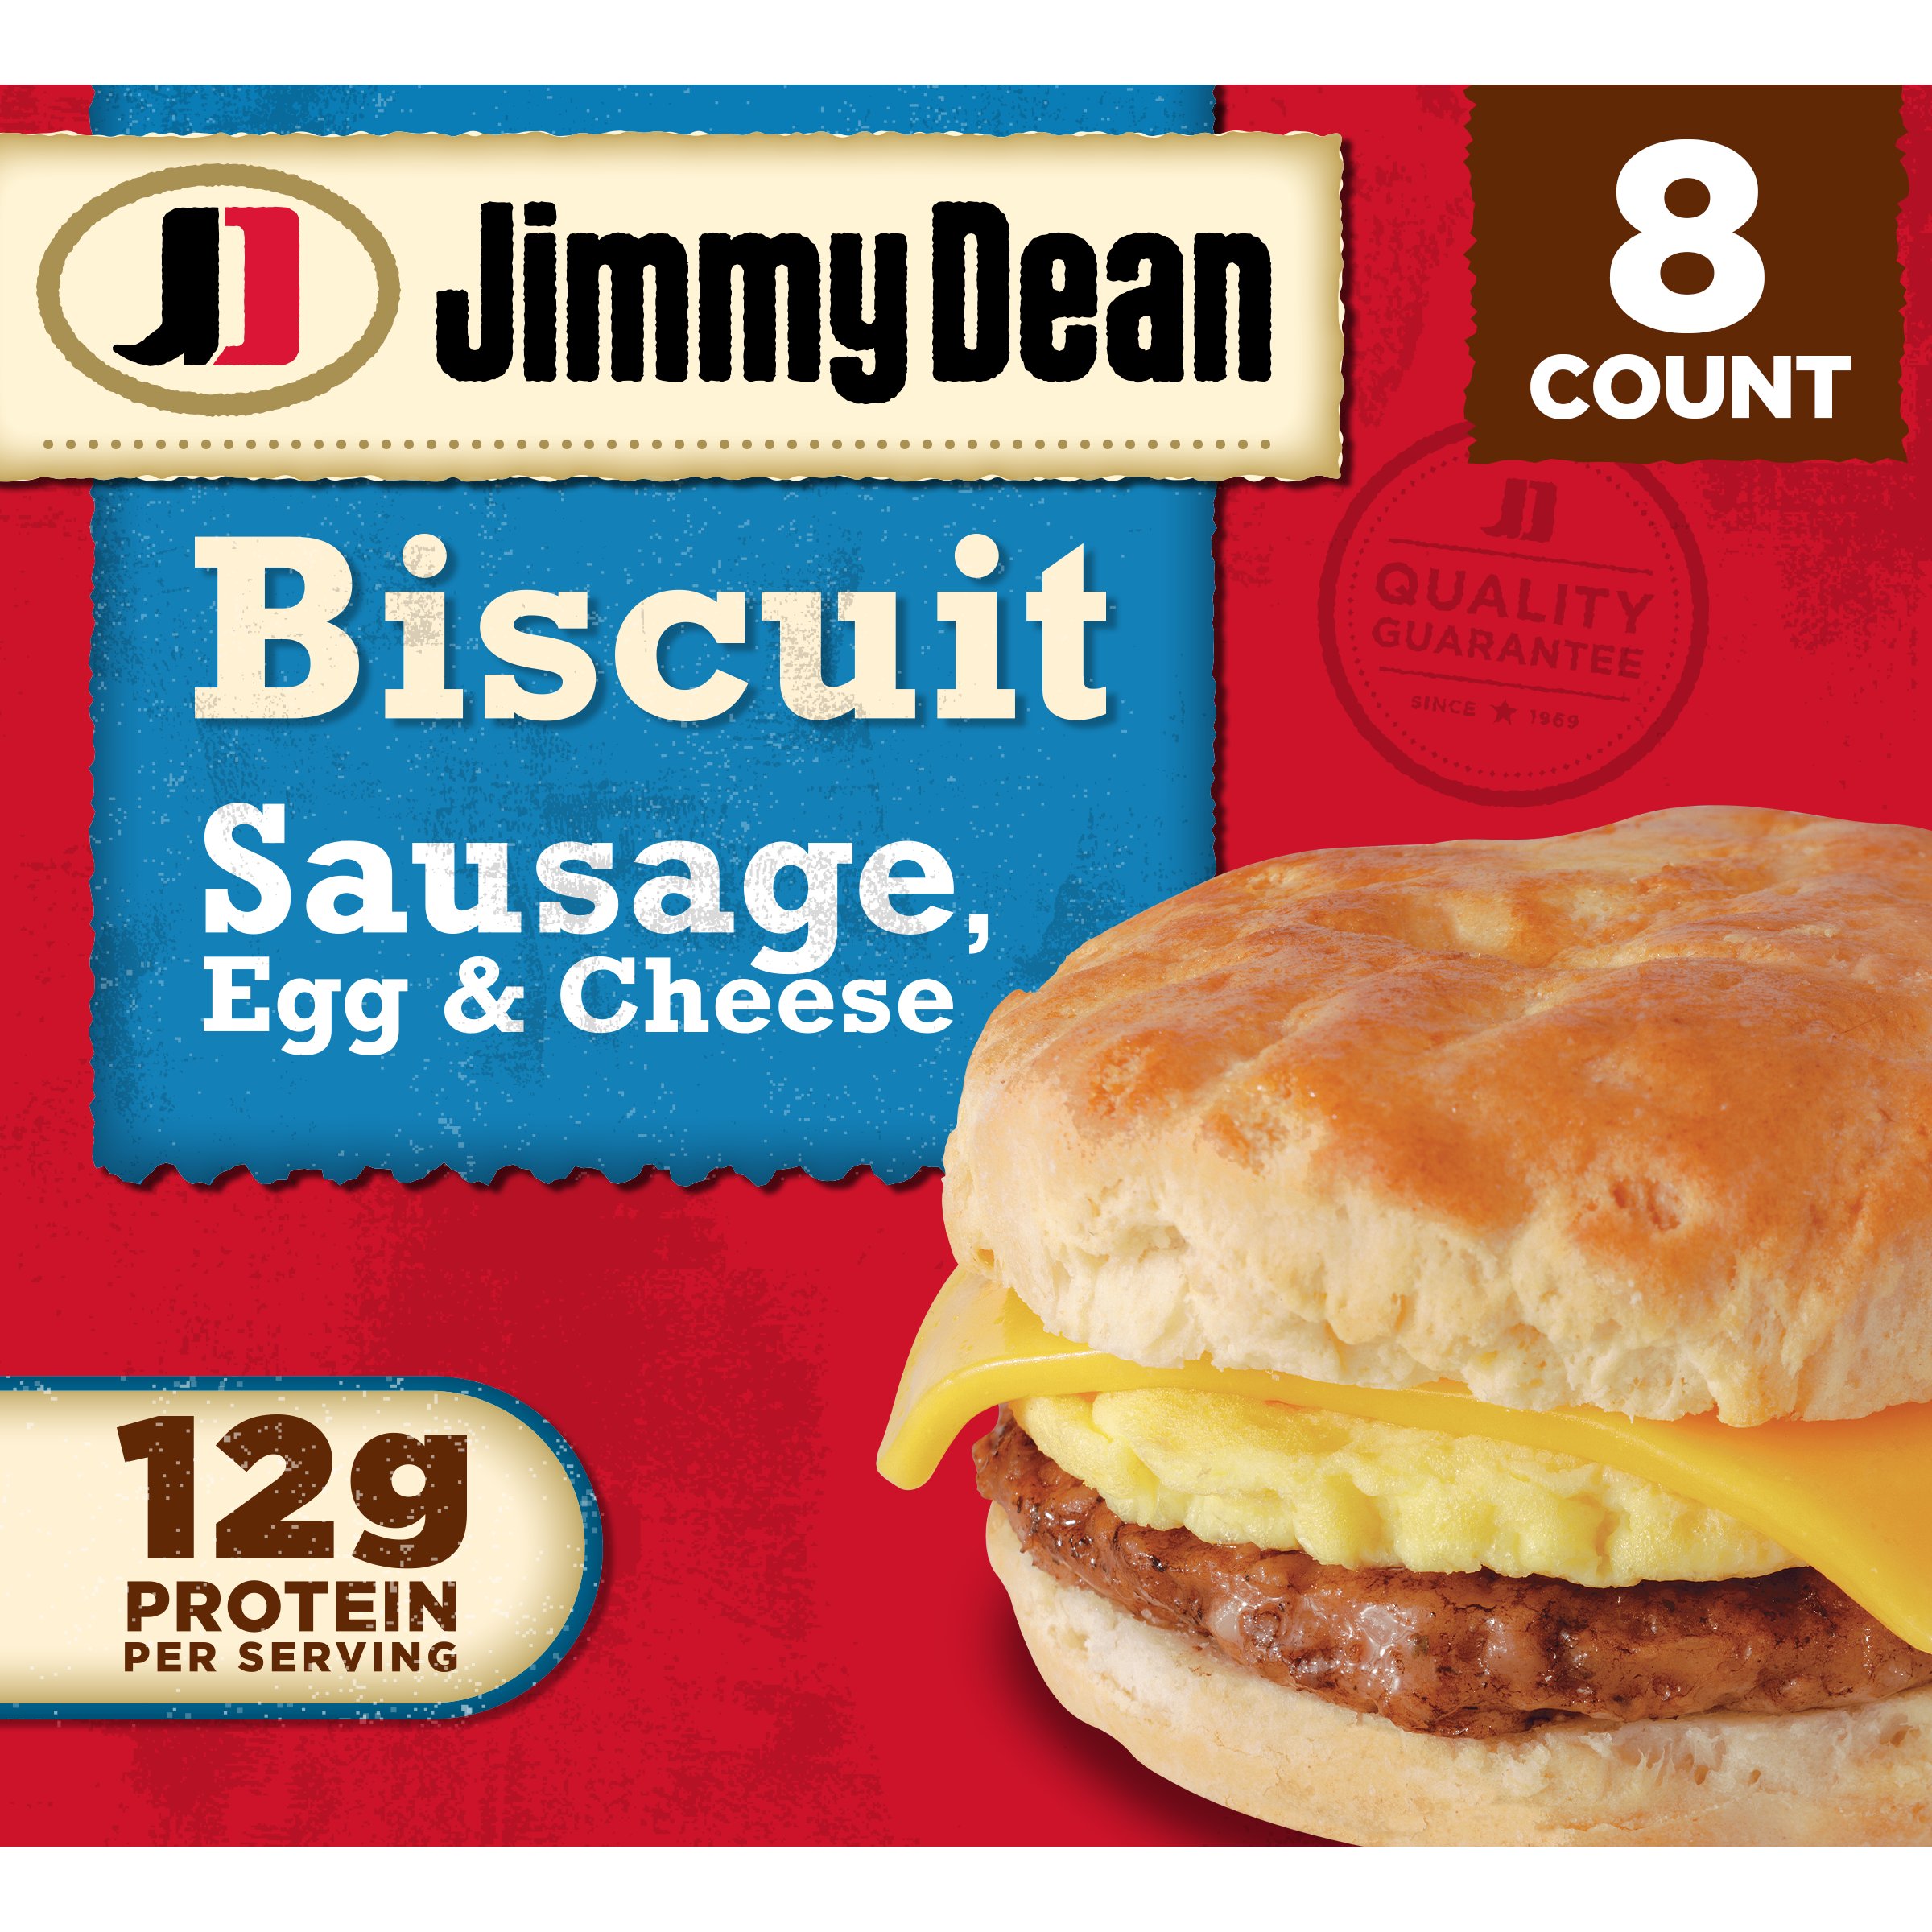 Jimmy Dean Sausage, Egg & Cheese Biscuit Sandwiches - Shop Entrees ...